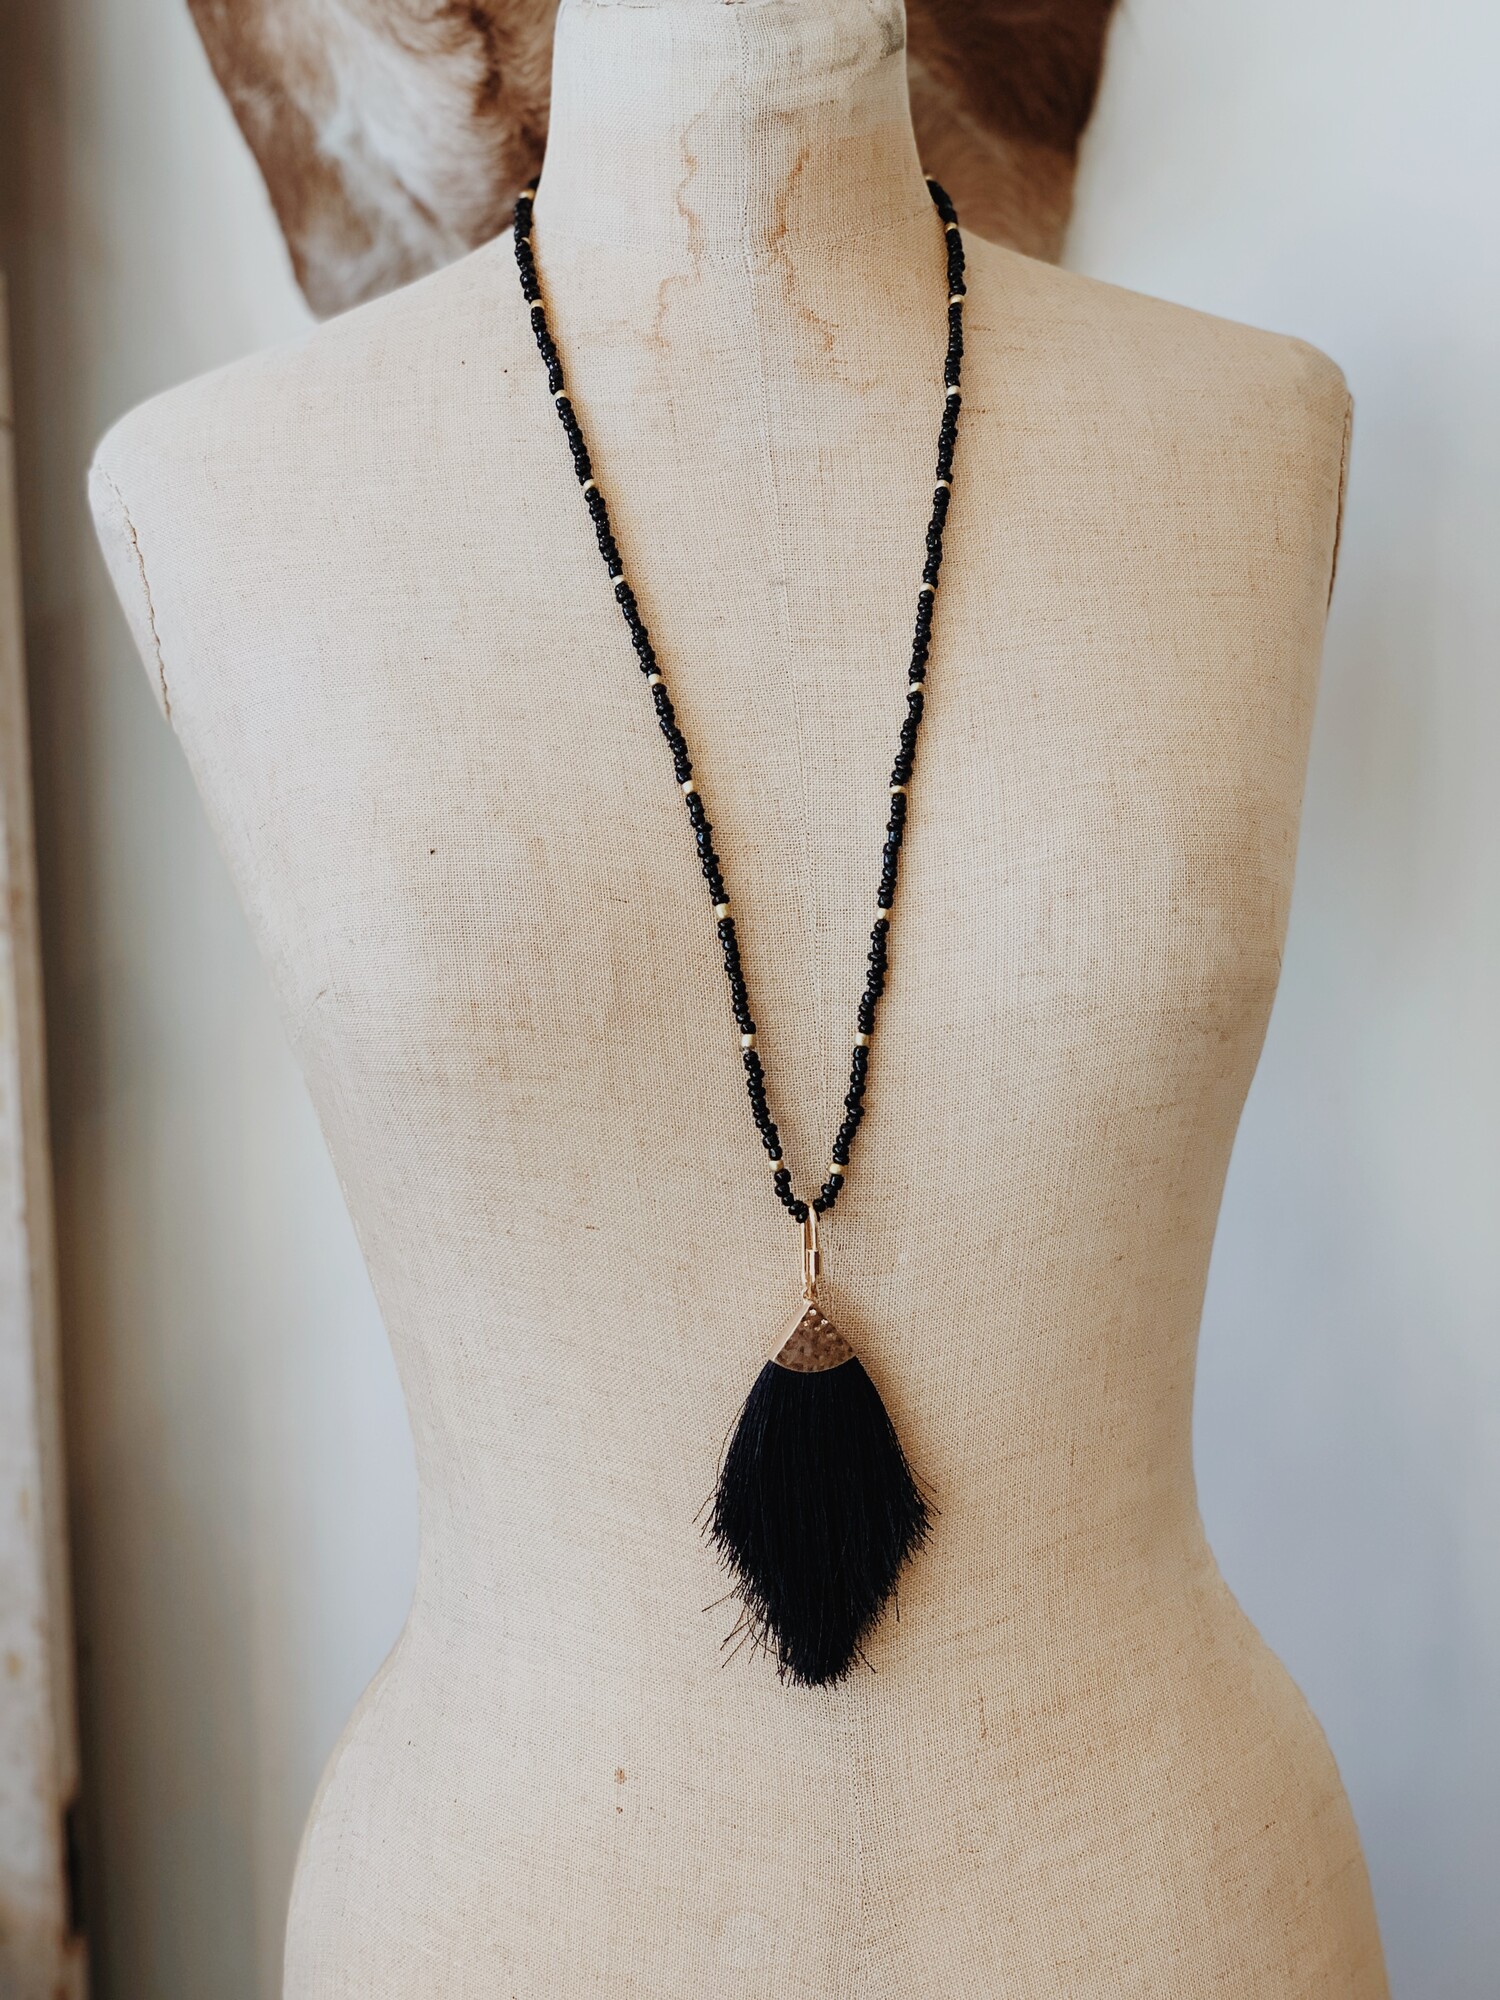 This black tassel necklace is on a 32 inch beaded cord. This beautiful necklace is black with gold accents!